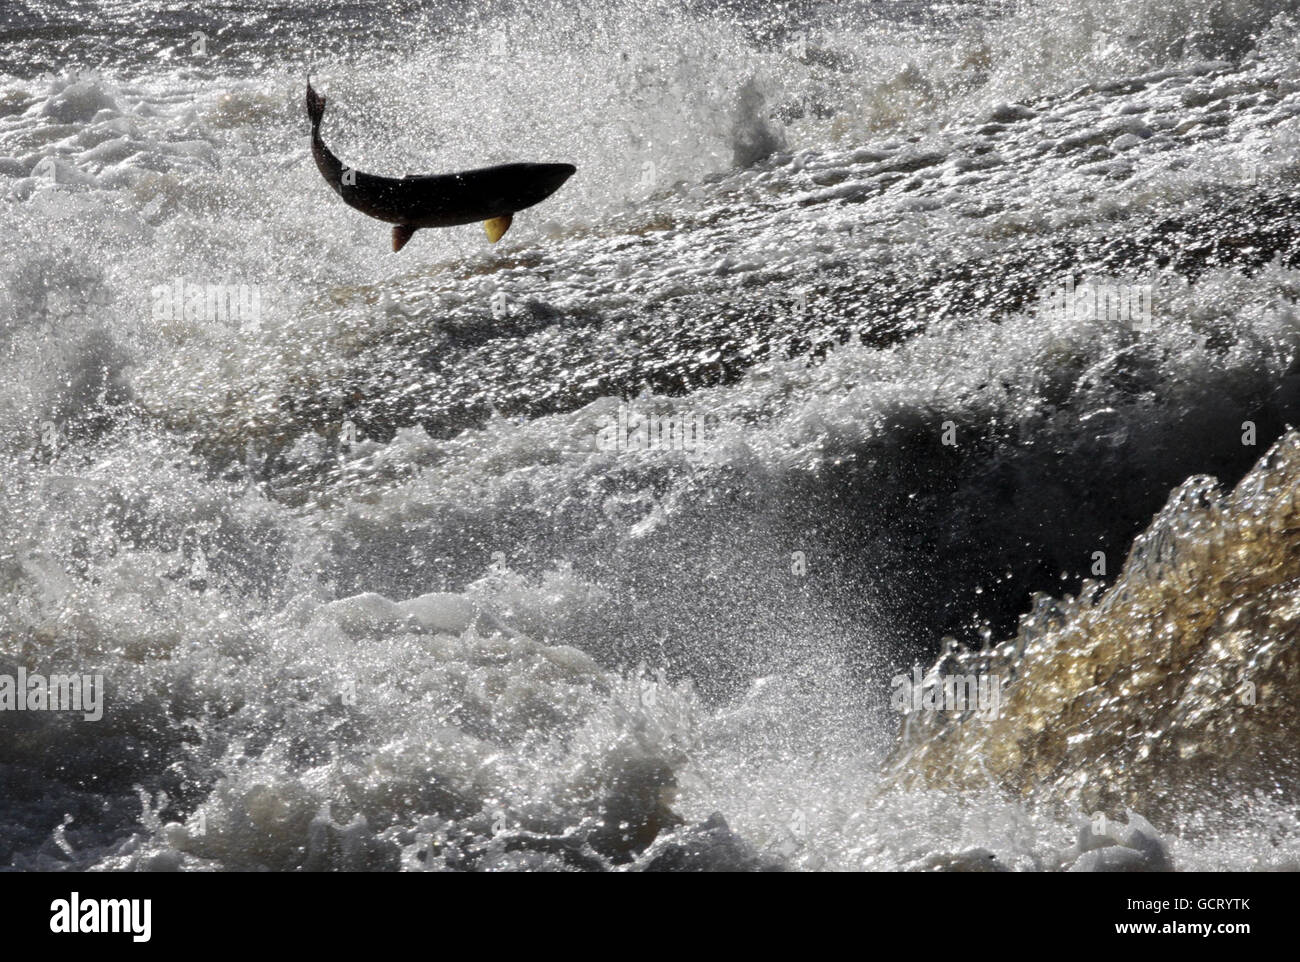 Migrating salmon, weighing up to 10kg, leap the Selkirk Cauld on the River Ettrick, in the Scottish Borders after travelling up from the North Sea coast. Stock Photo